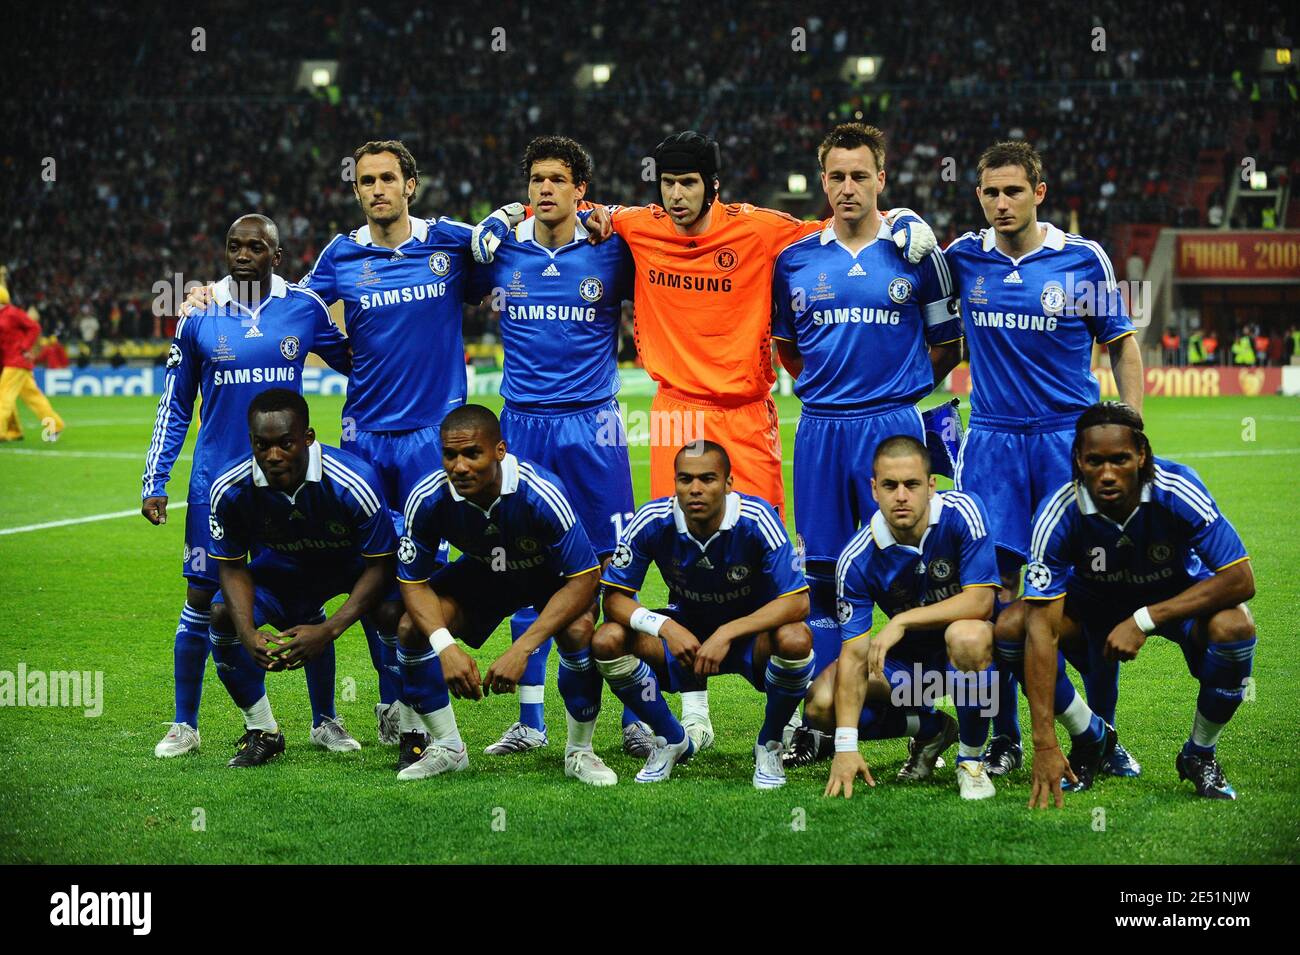 Chelsea's team group during the UEFA Champions League Final Soccer match,  Manchester United vs Chelsea at the Luzhniki Stadium in Moscow, Russia on  May 21, 2008. The match ended in a 1-1